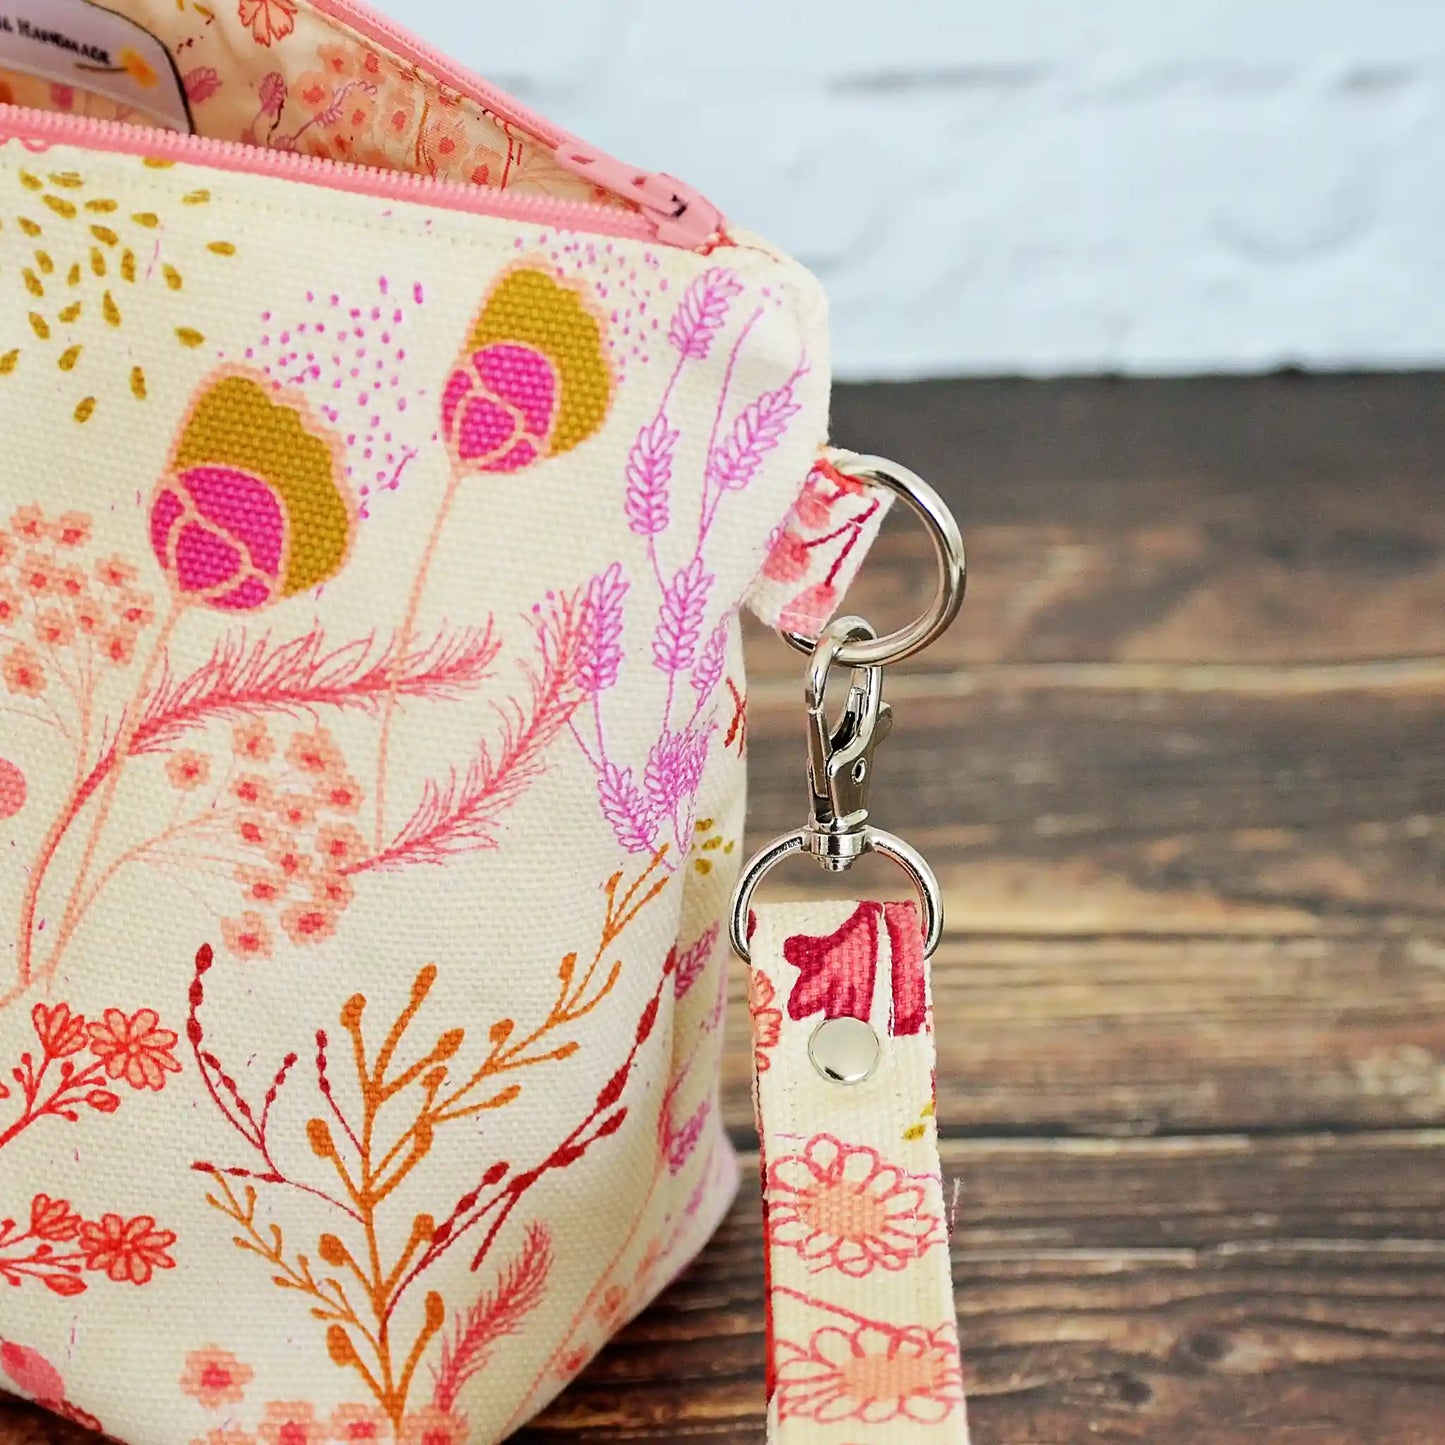 Small zippered project bag in floral canvas.  Comes with removable wrist strap.  Handmade in Nova Scotia, Canada.